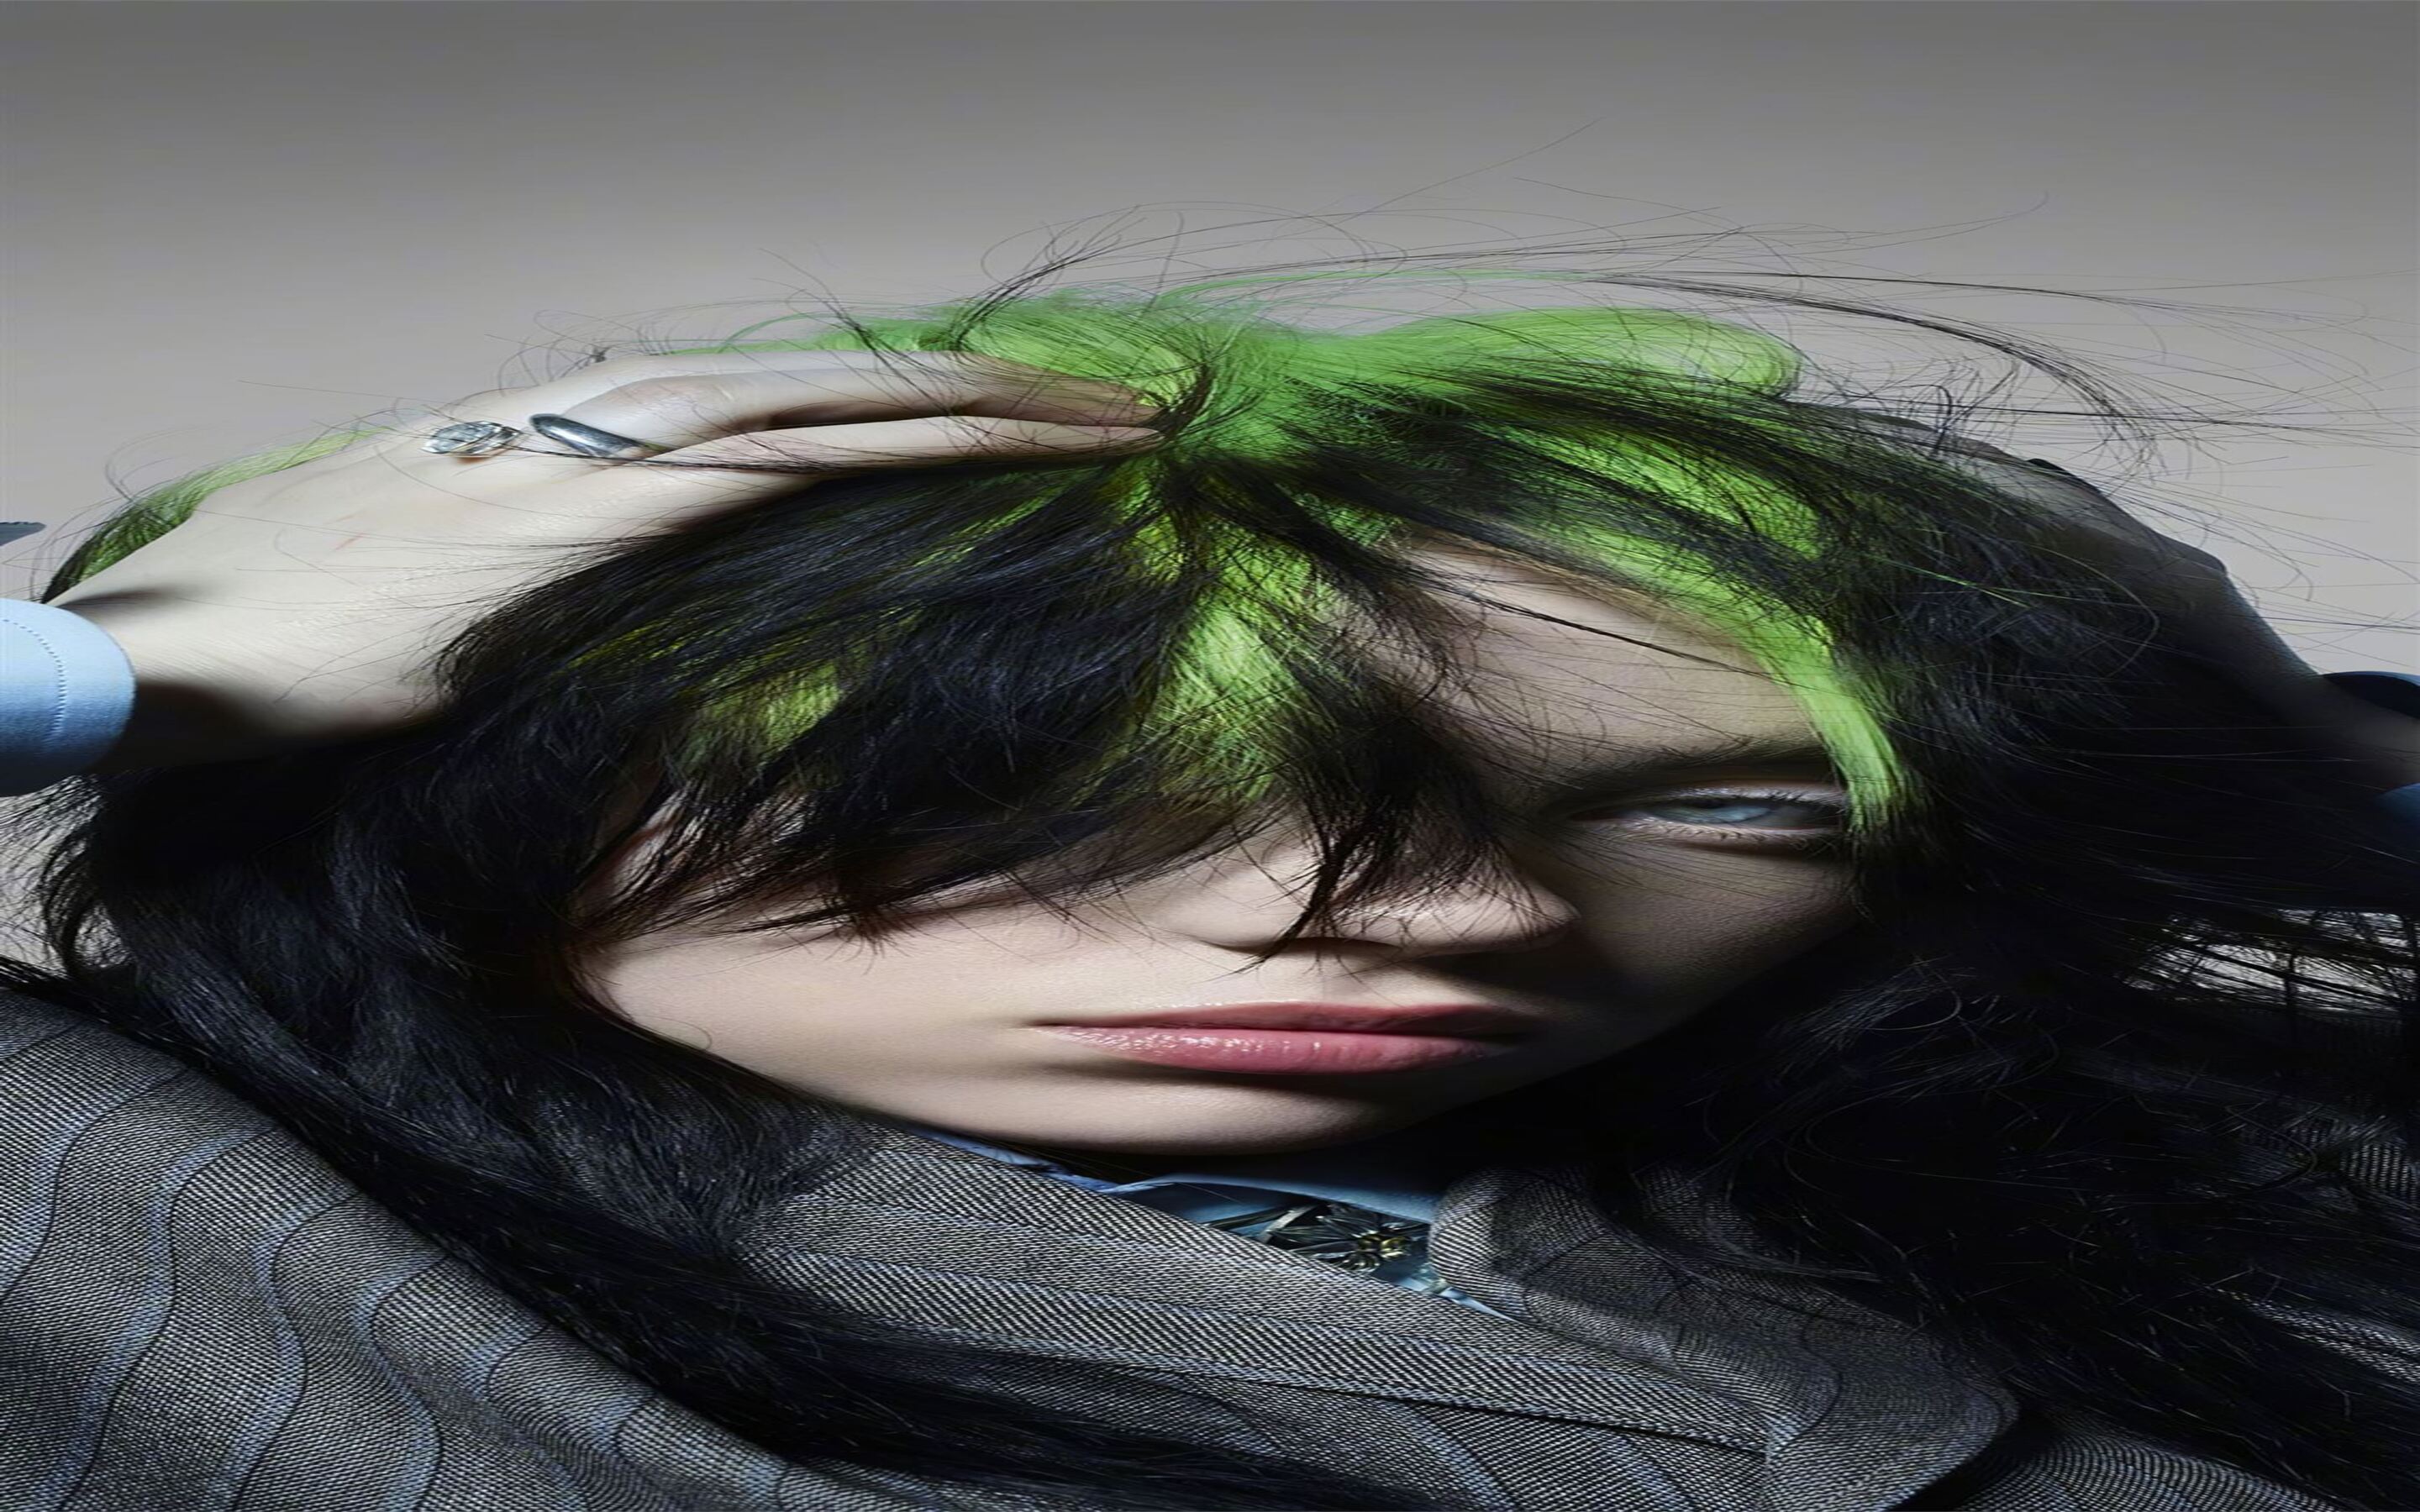 Singer and style icon Billie Eilish in neon green ombre hair 4K wallpaper  download